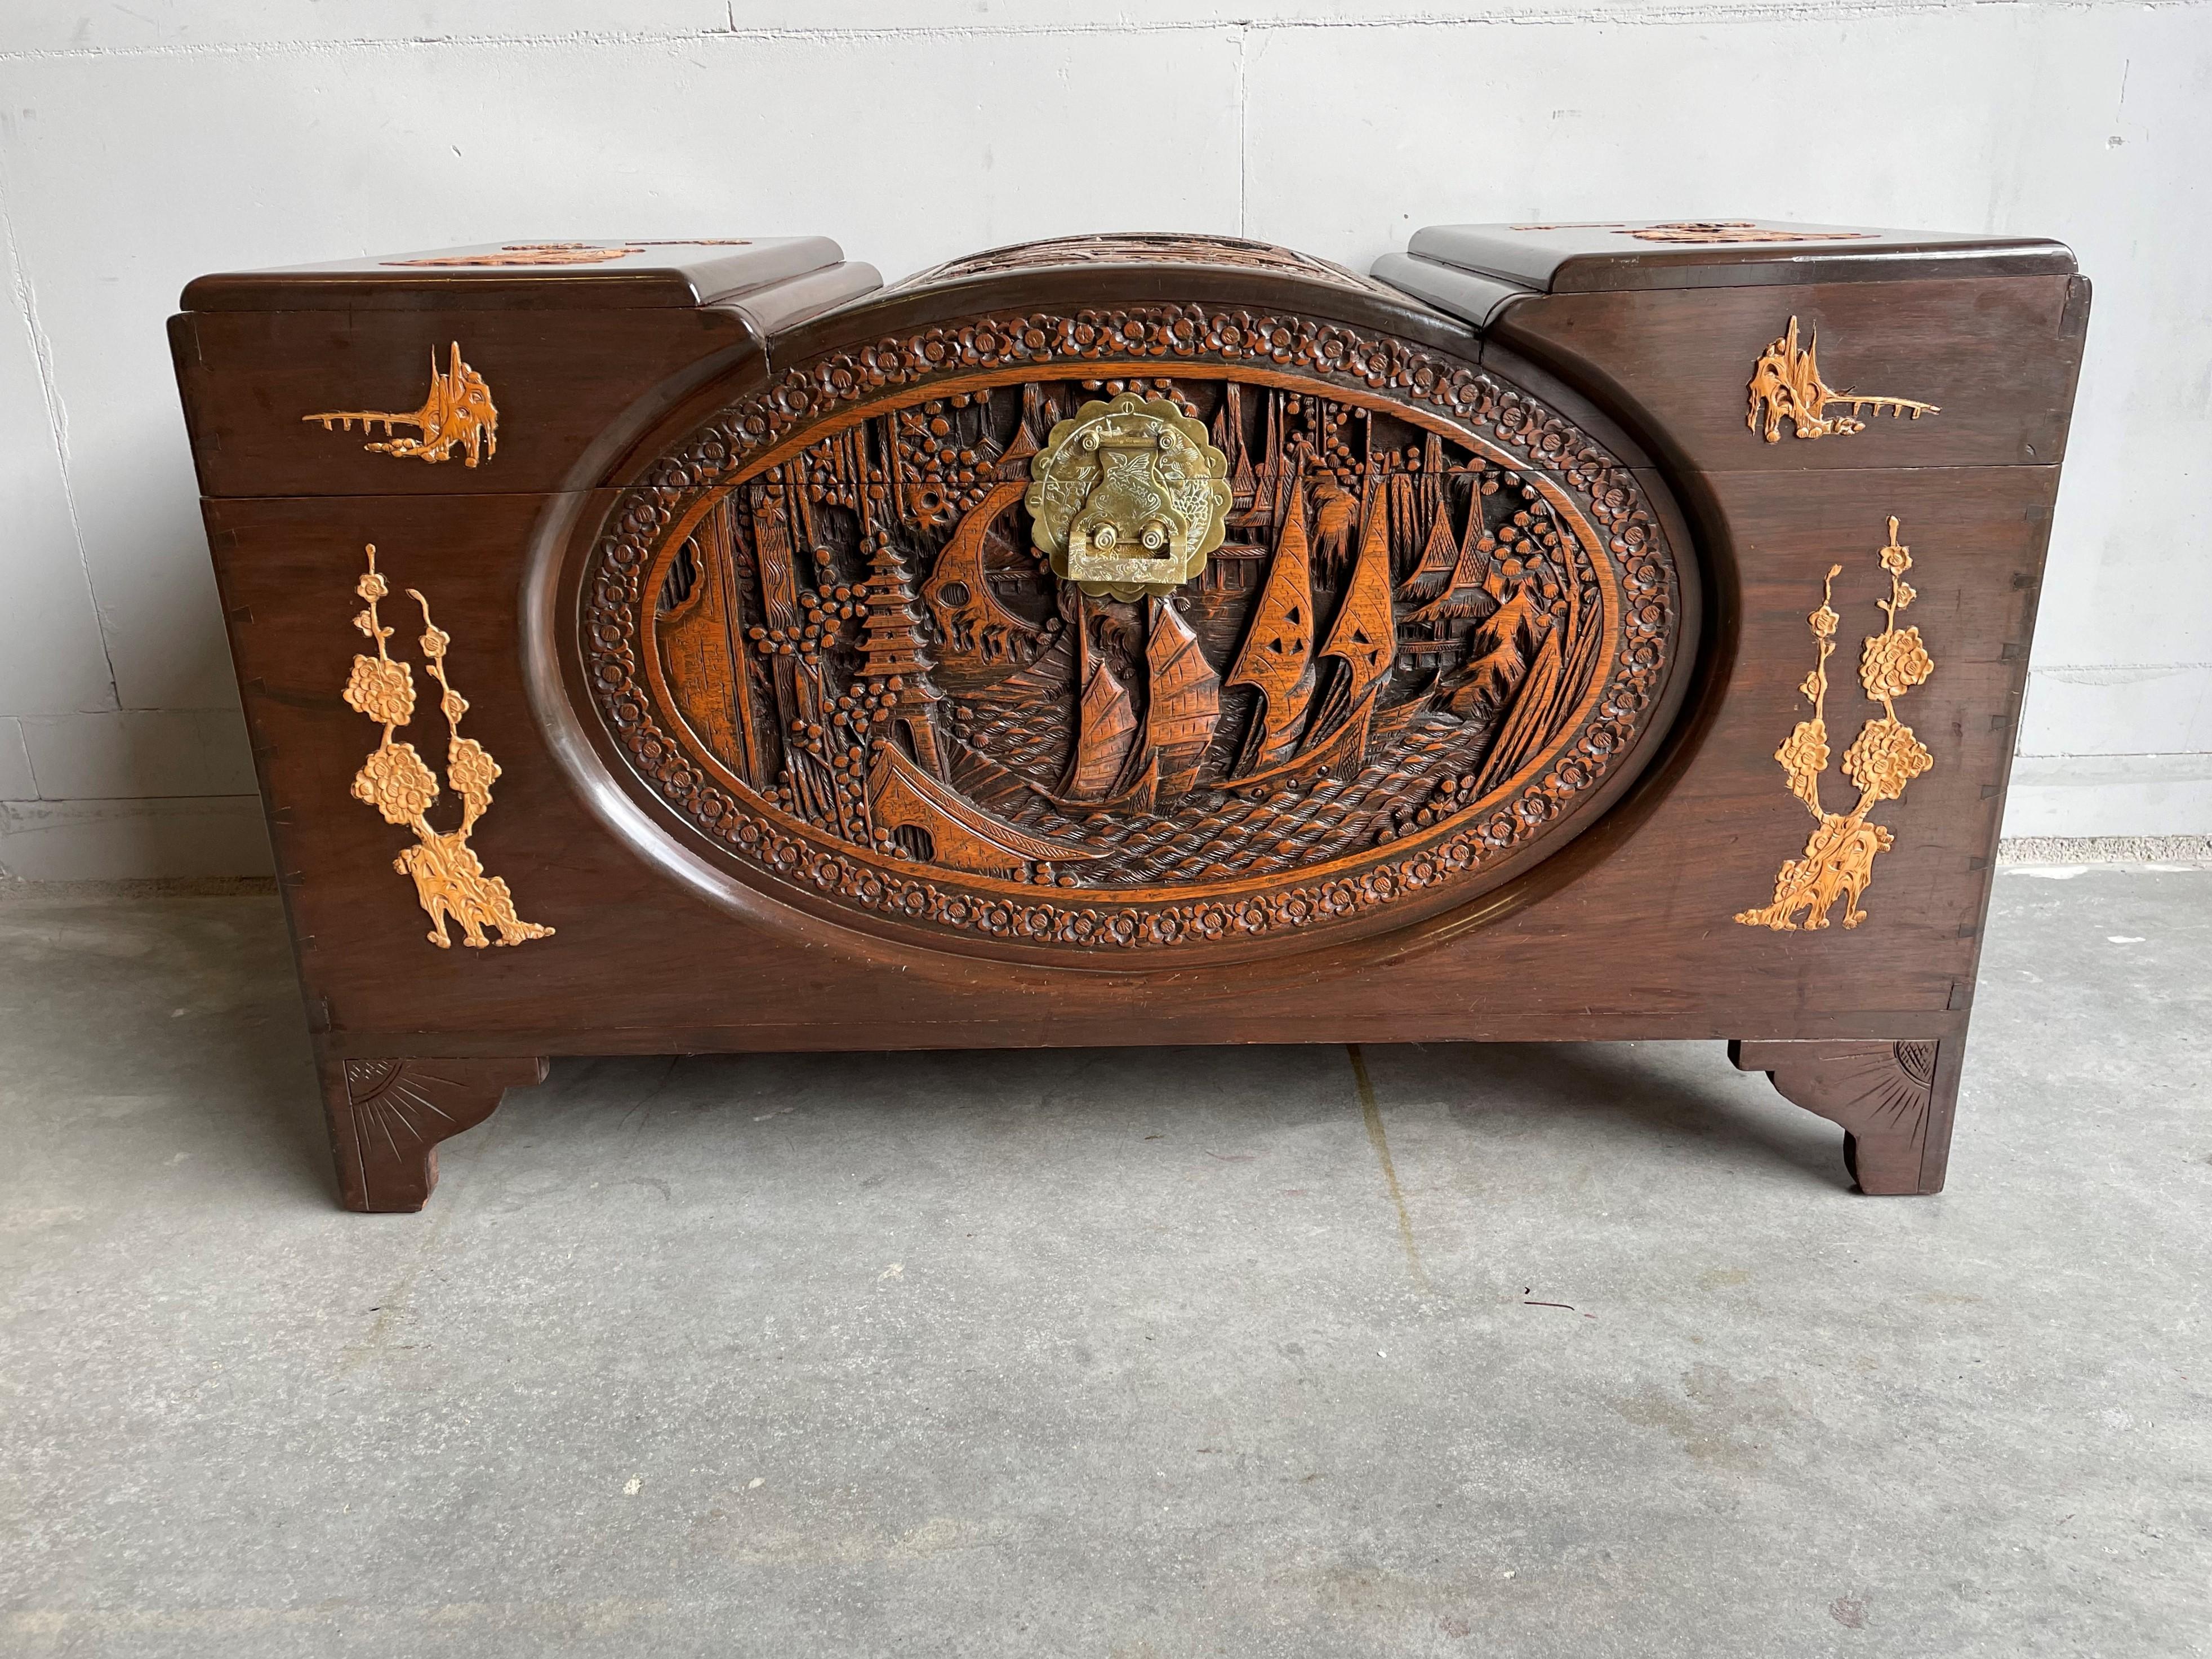 Chinese Export Antique & Perfectly Hand Carved Teakwood Chinese Blanket Chest w. Boat Sculpture